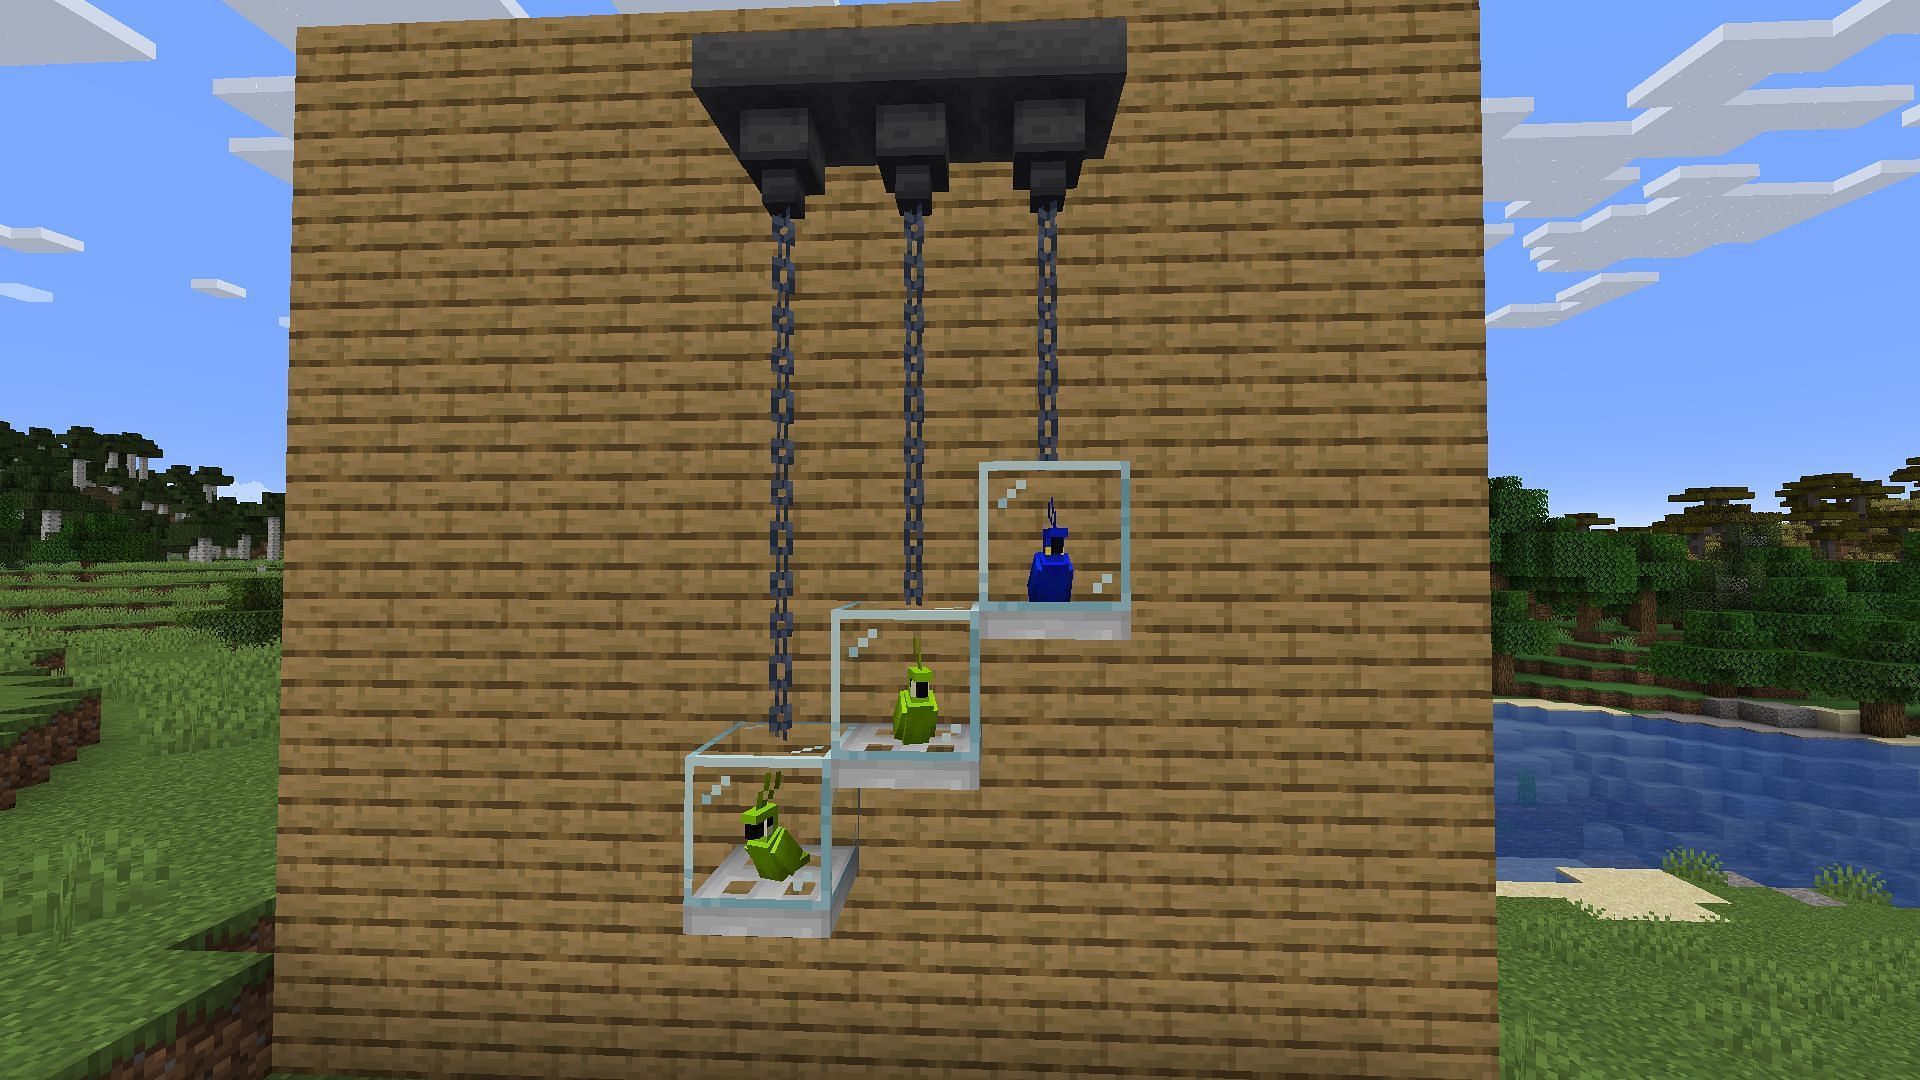 One Minecraft player shared an intriguing way to create bird cages for pet parrots (Image via Mojang)